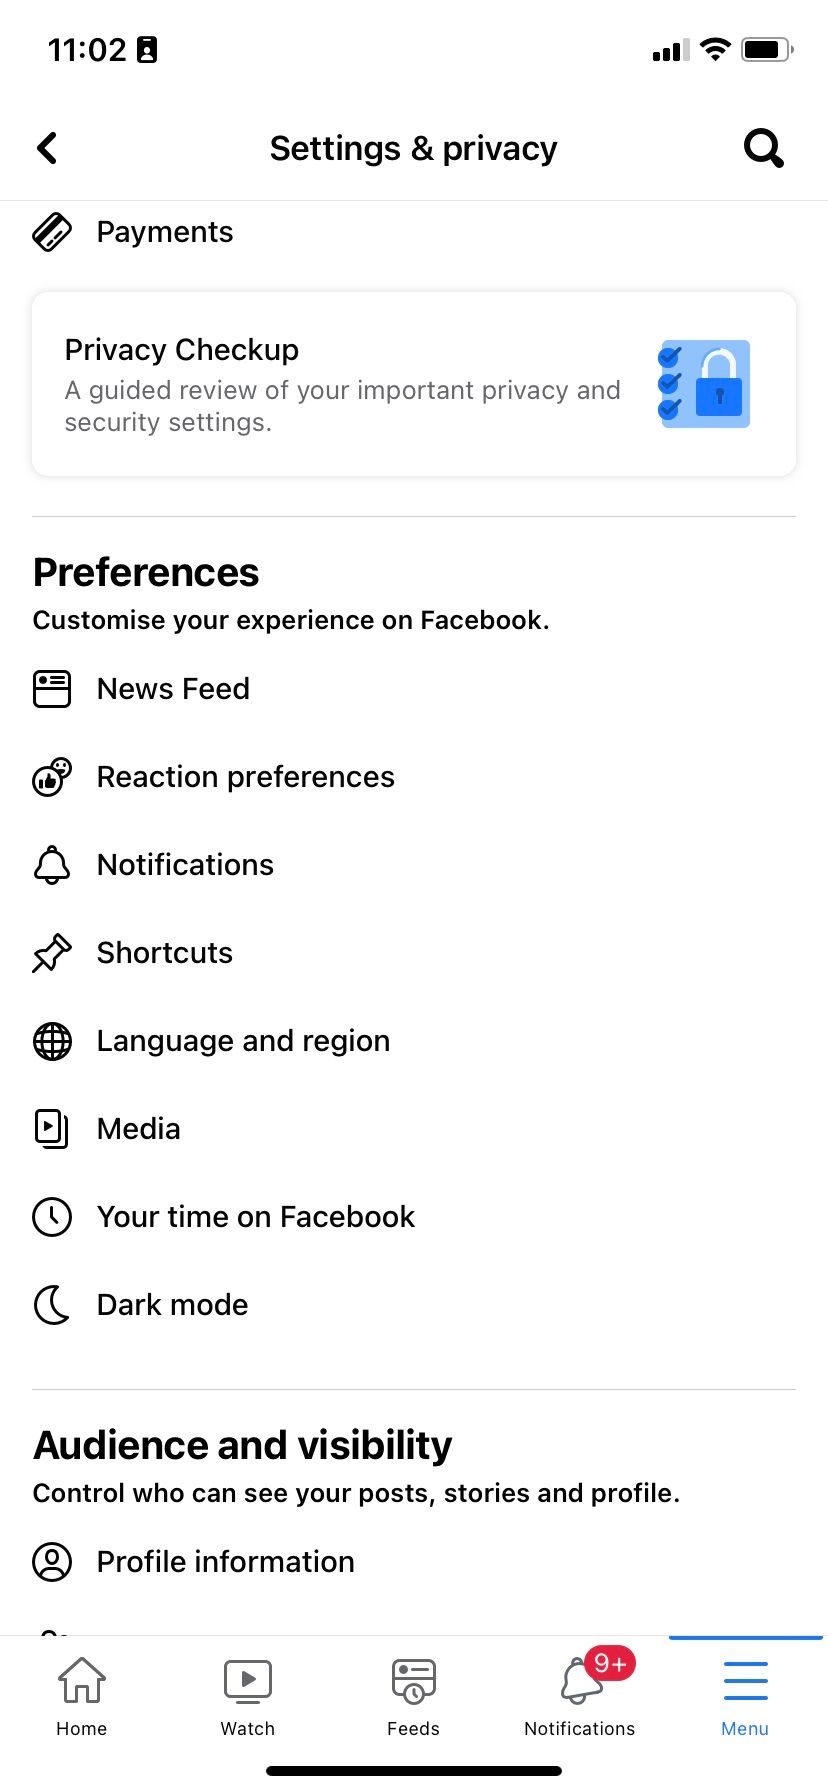 Settings and privacy page in Facebook's iOS app